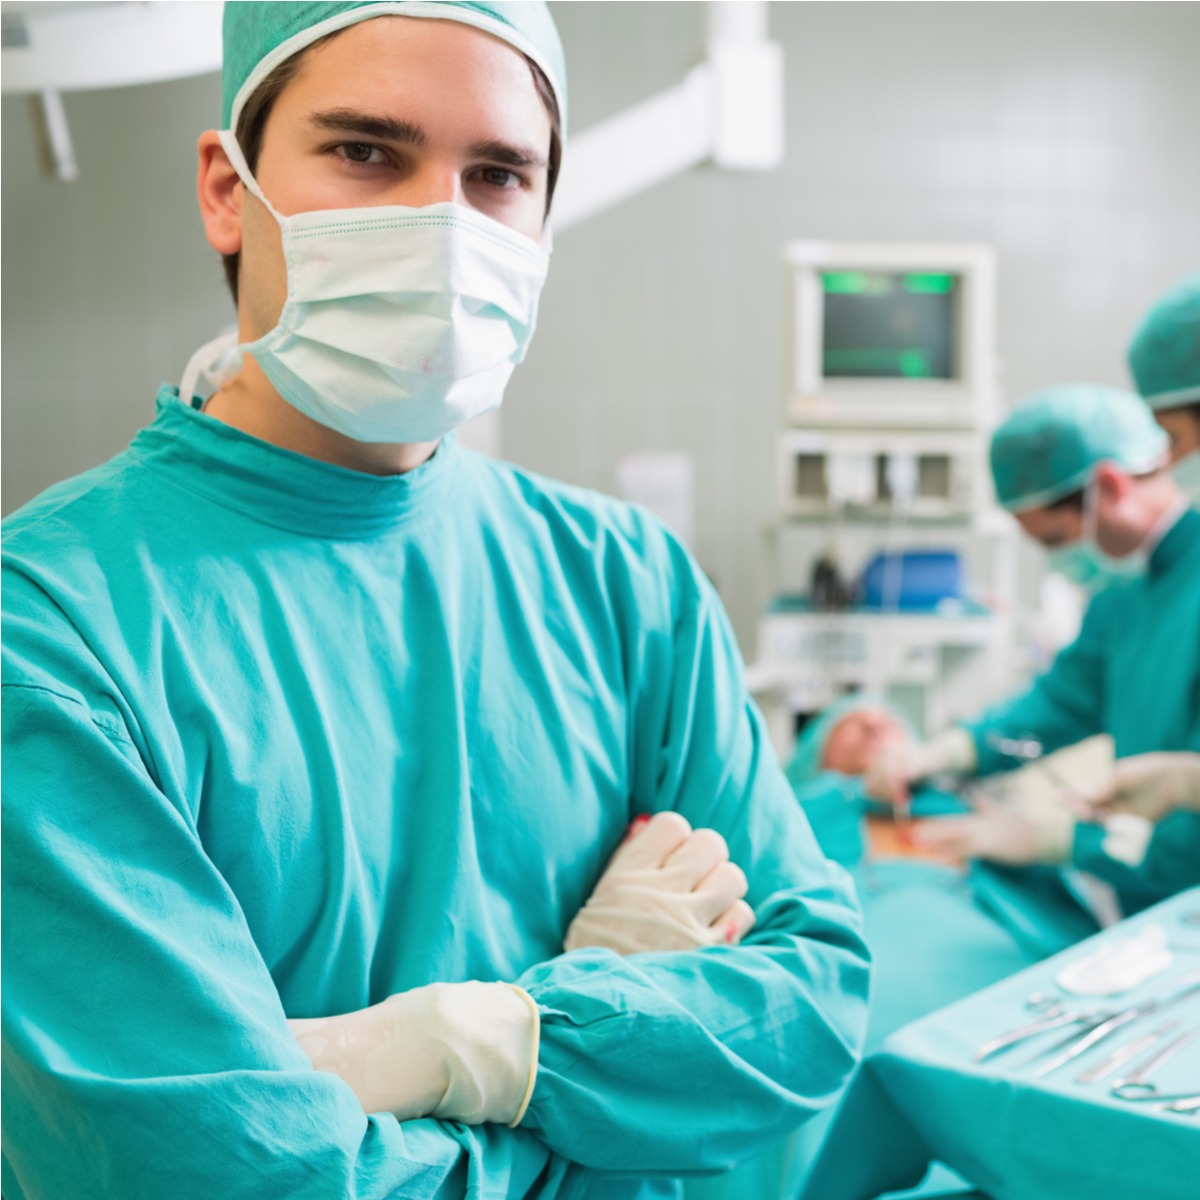 Why are Surgical Linens and Gowns Green?